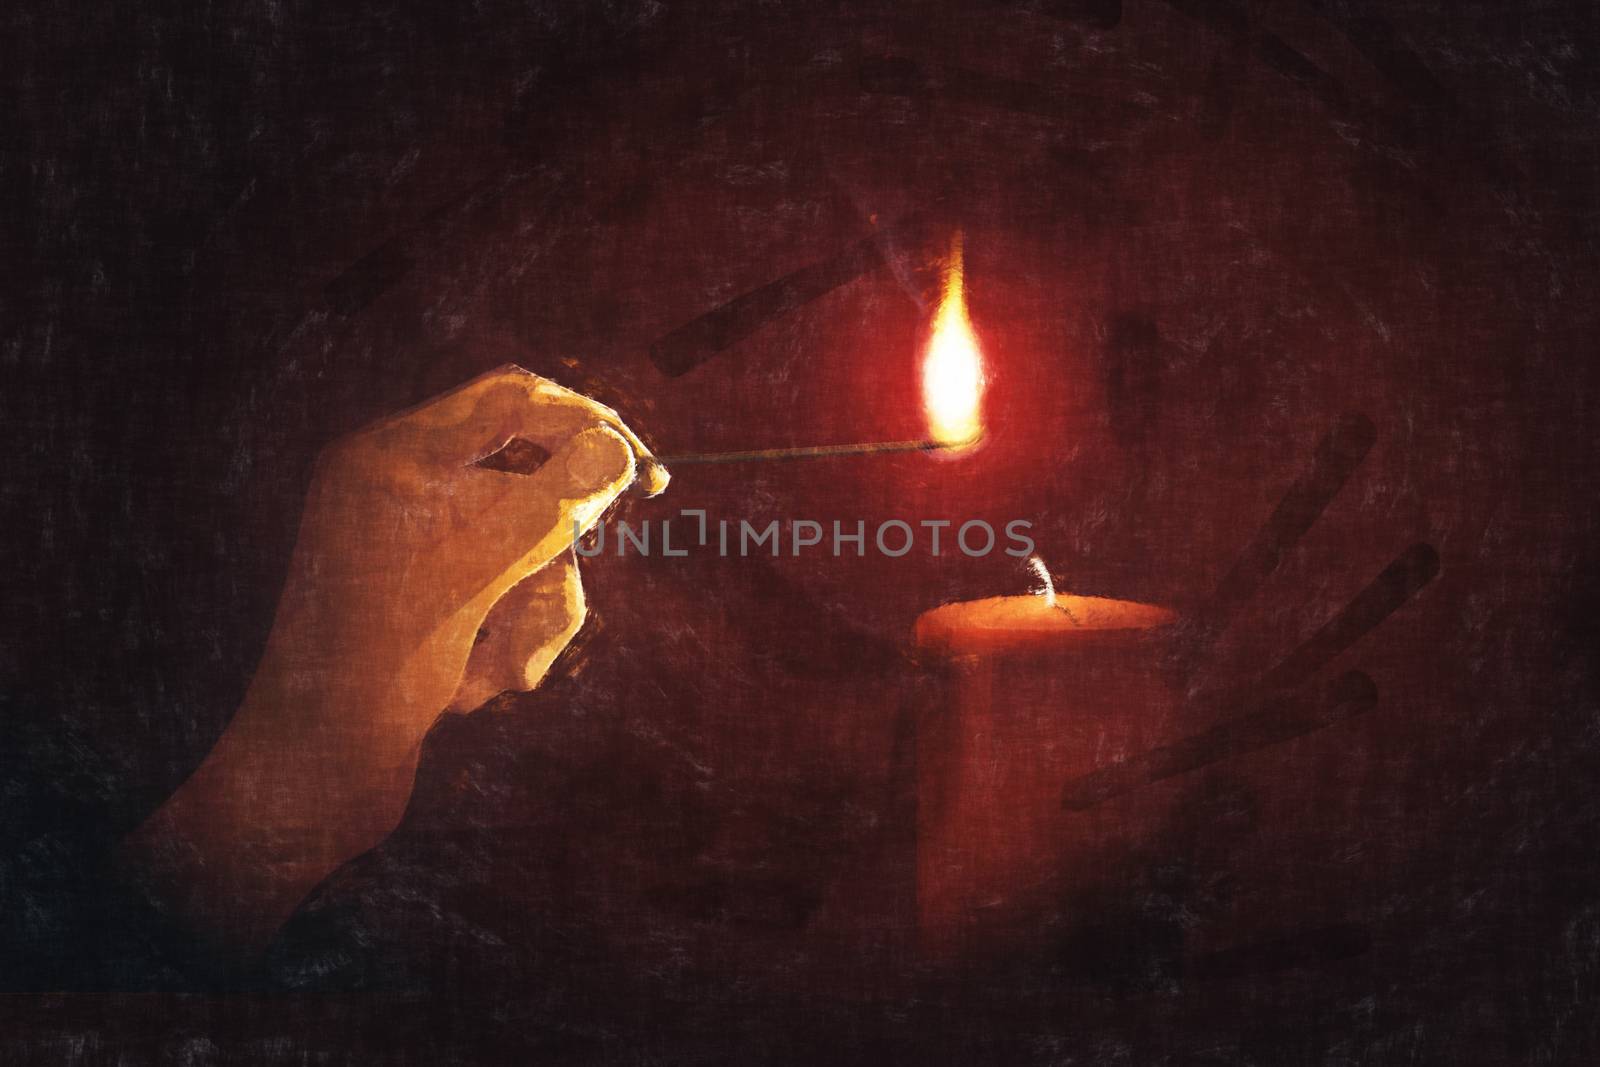 An illustration of light a candle for someone digital painting